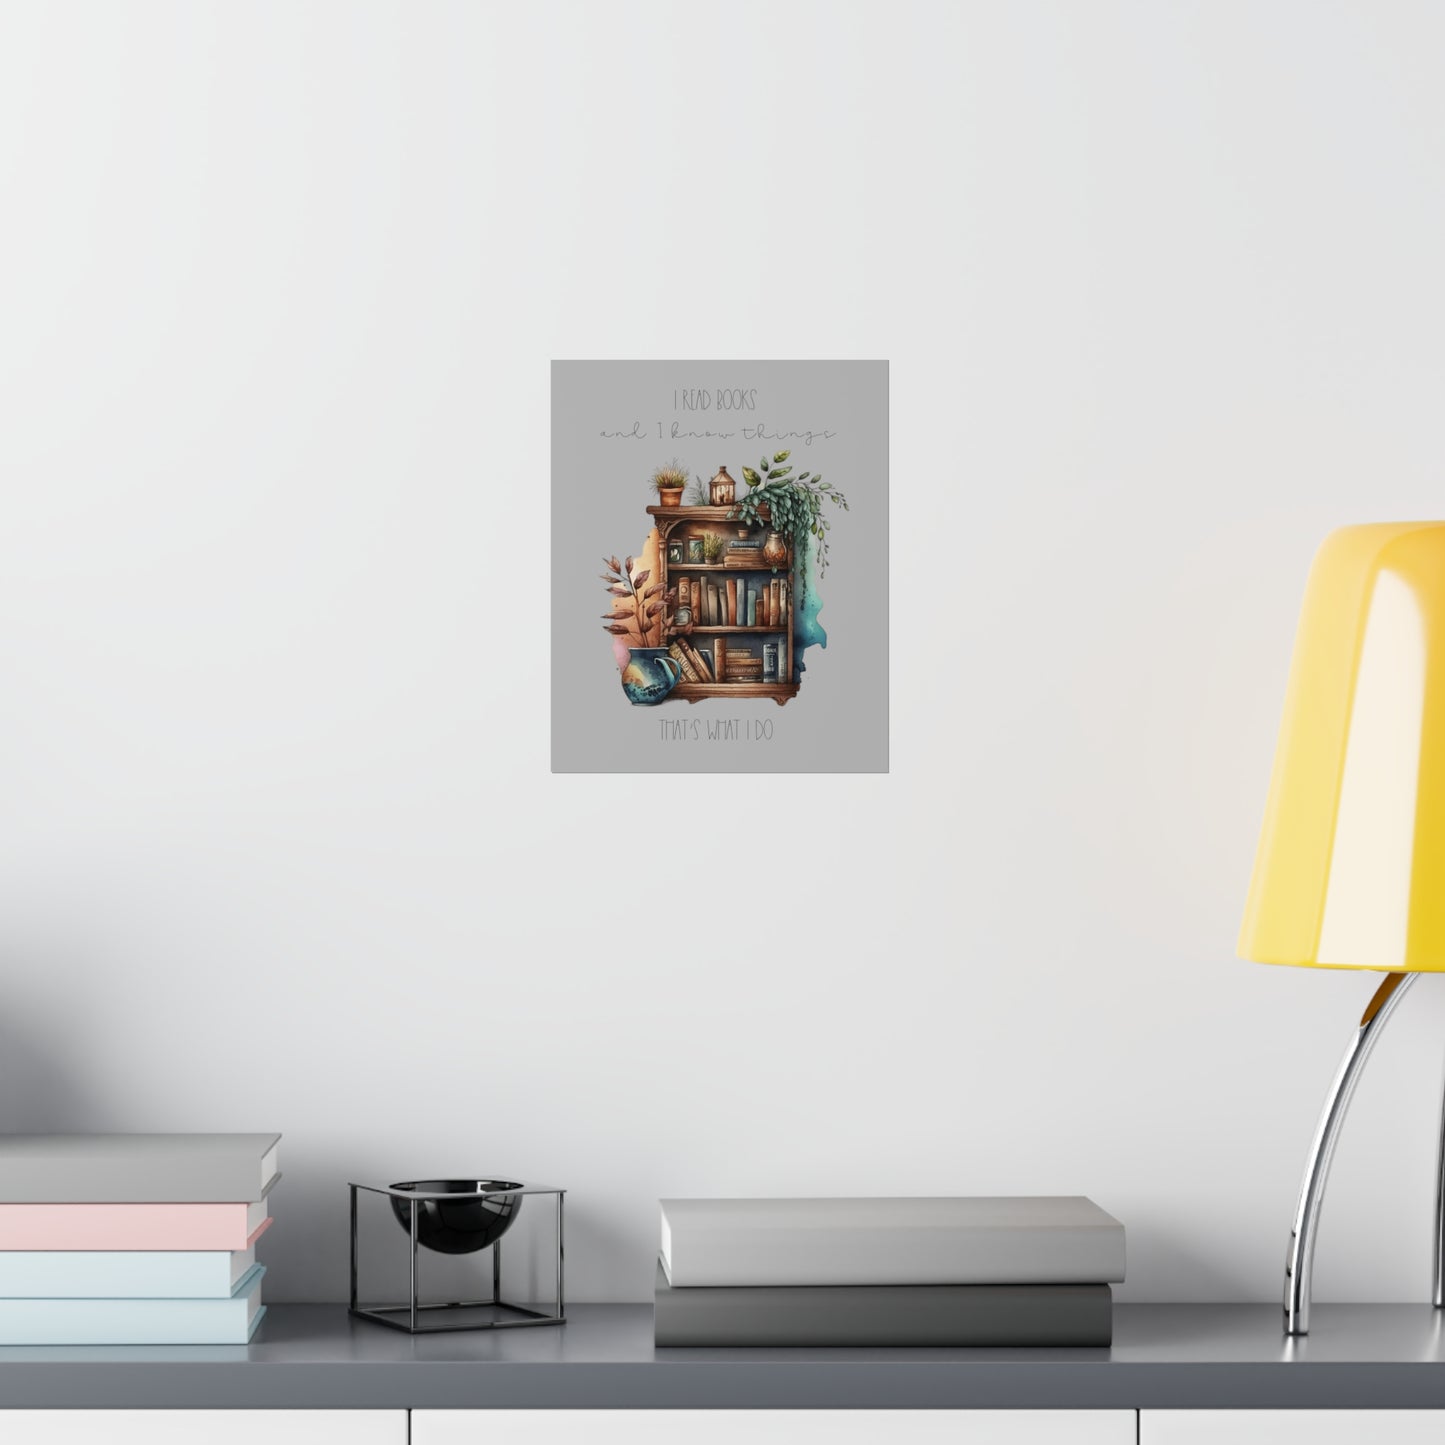 Premium Matte Vertical Posters “I read books and I know things. That’s what I do.”